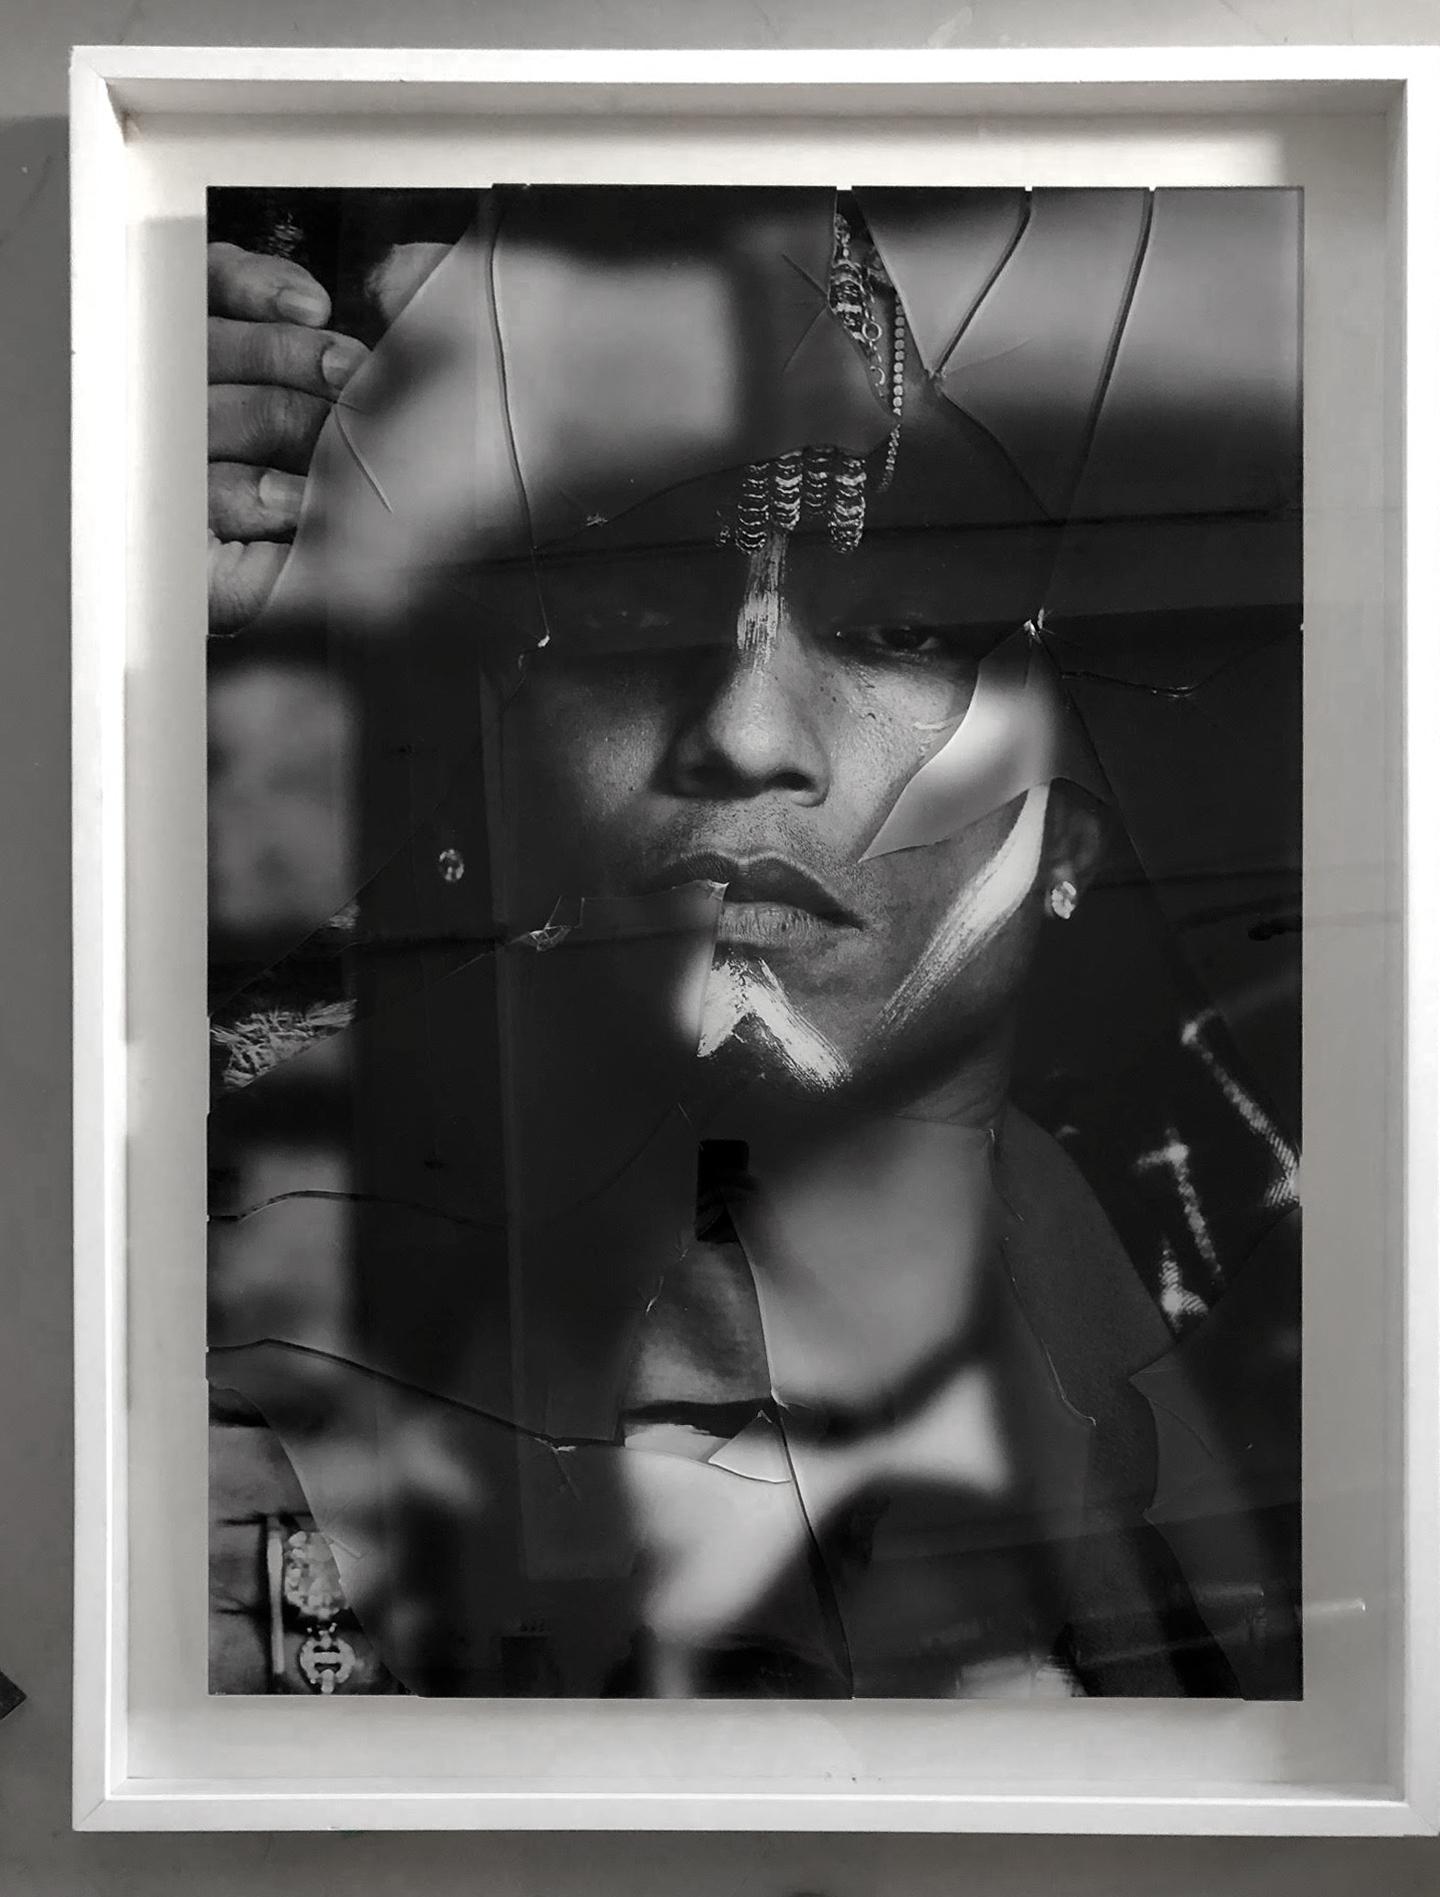 Pharrell Williams #3 by Hunter & Gatti
Black and White Photography with broken glass on top of the image.
Image size: 45.2 in. H x 32.5 in. W
Frame size: 52.5 in. H x 39 in. W x 2 in. D
One of a kind

The artist's technique consists of the use of